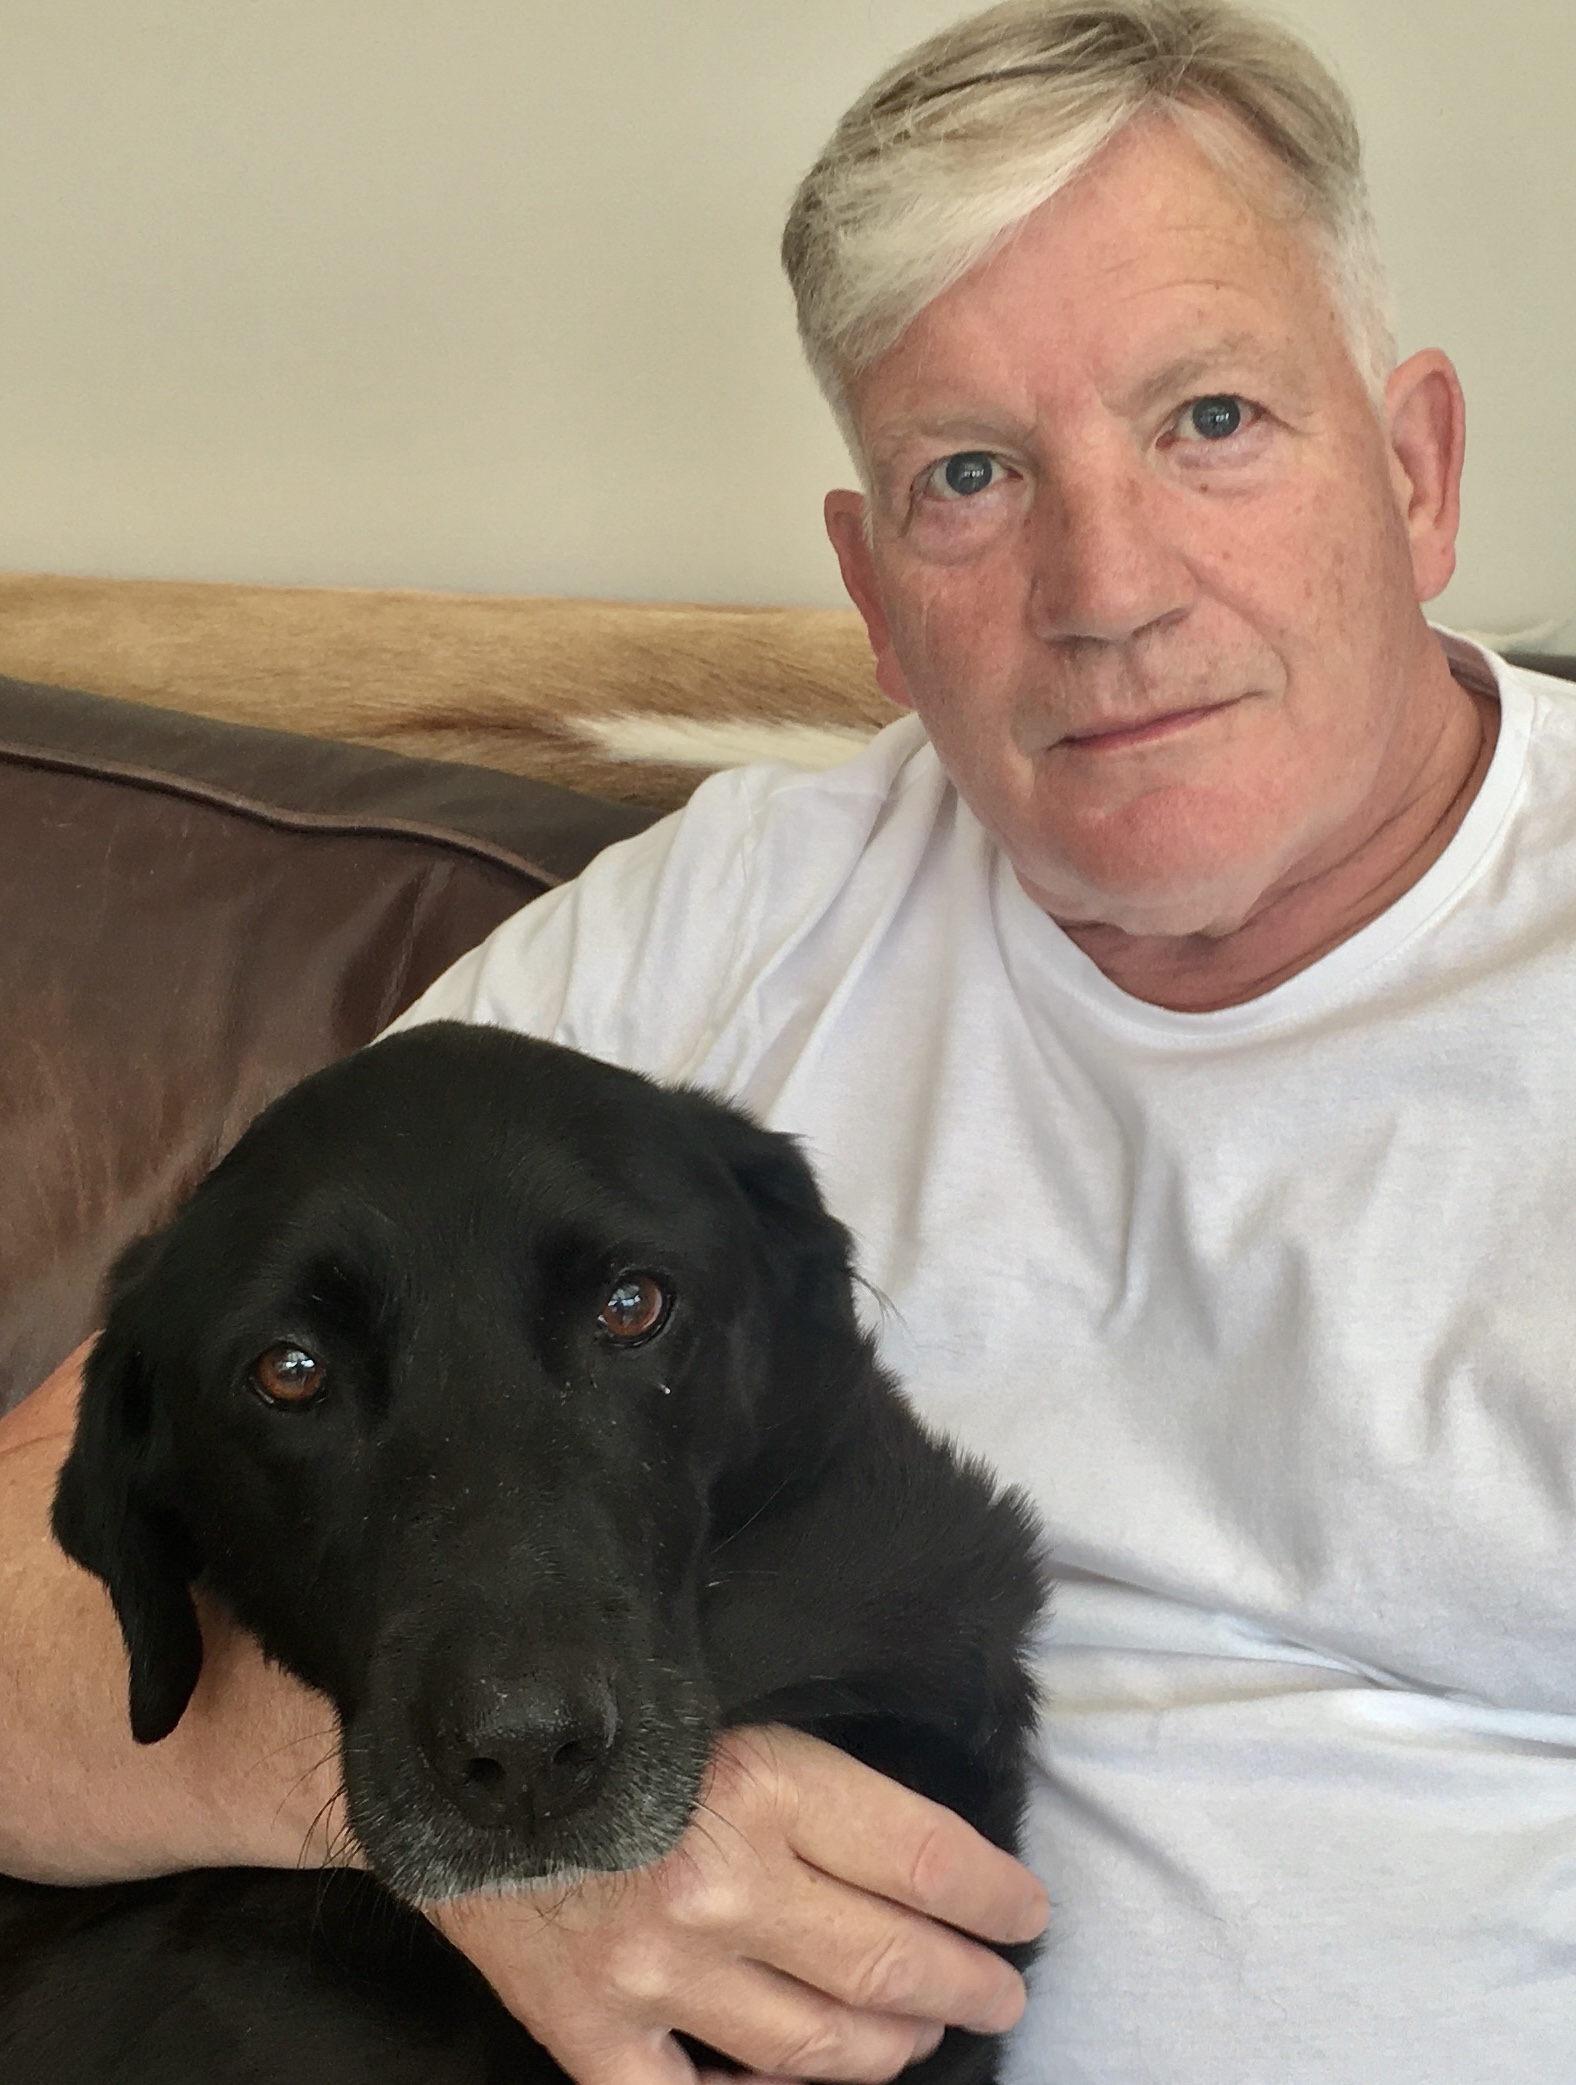 Black Labrador dog sat on sofa with her owner, a man with fair hair in a white t-shirt. Both are looking at the camera.